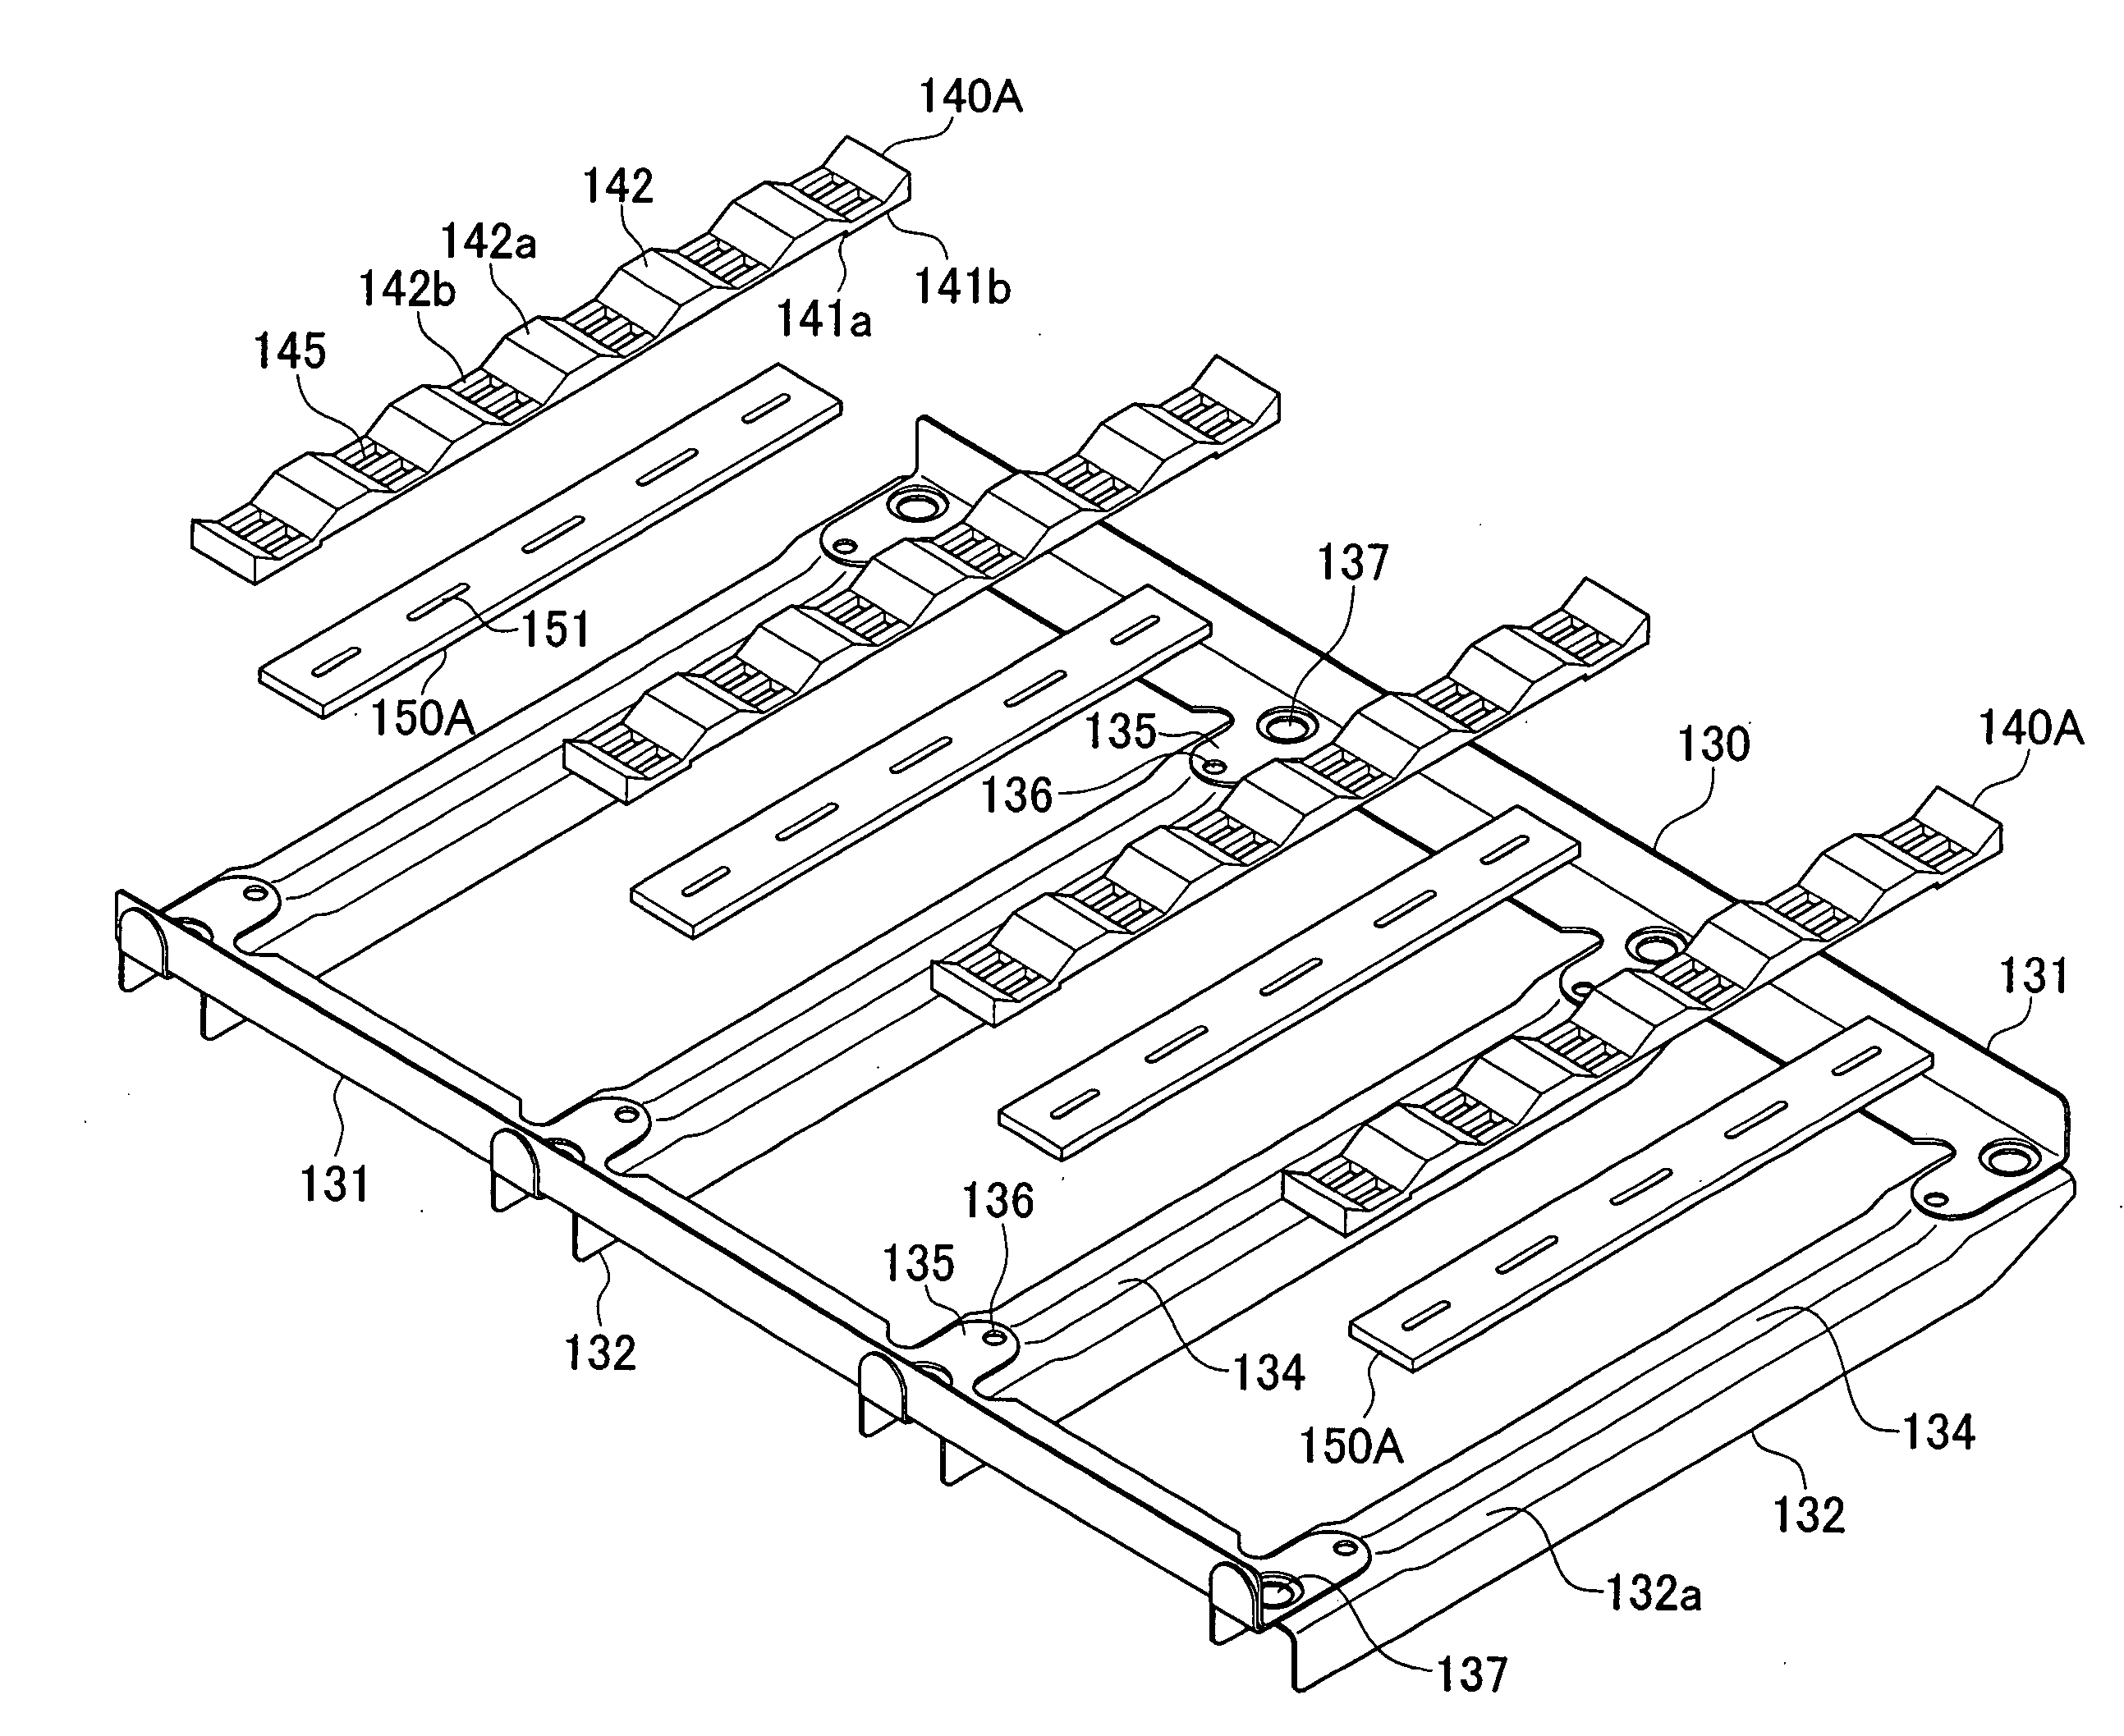 Battery pack having elastic body inserted between members for holding cell modules and frame of battery pack